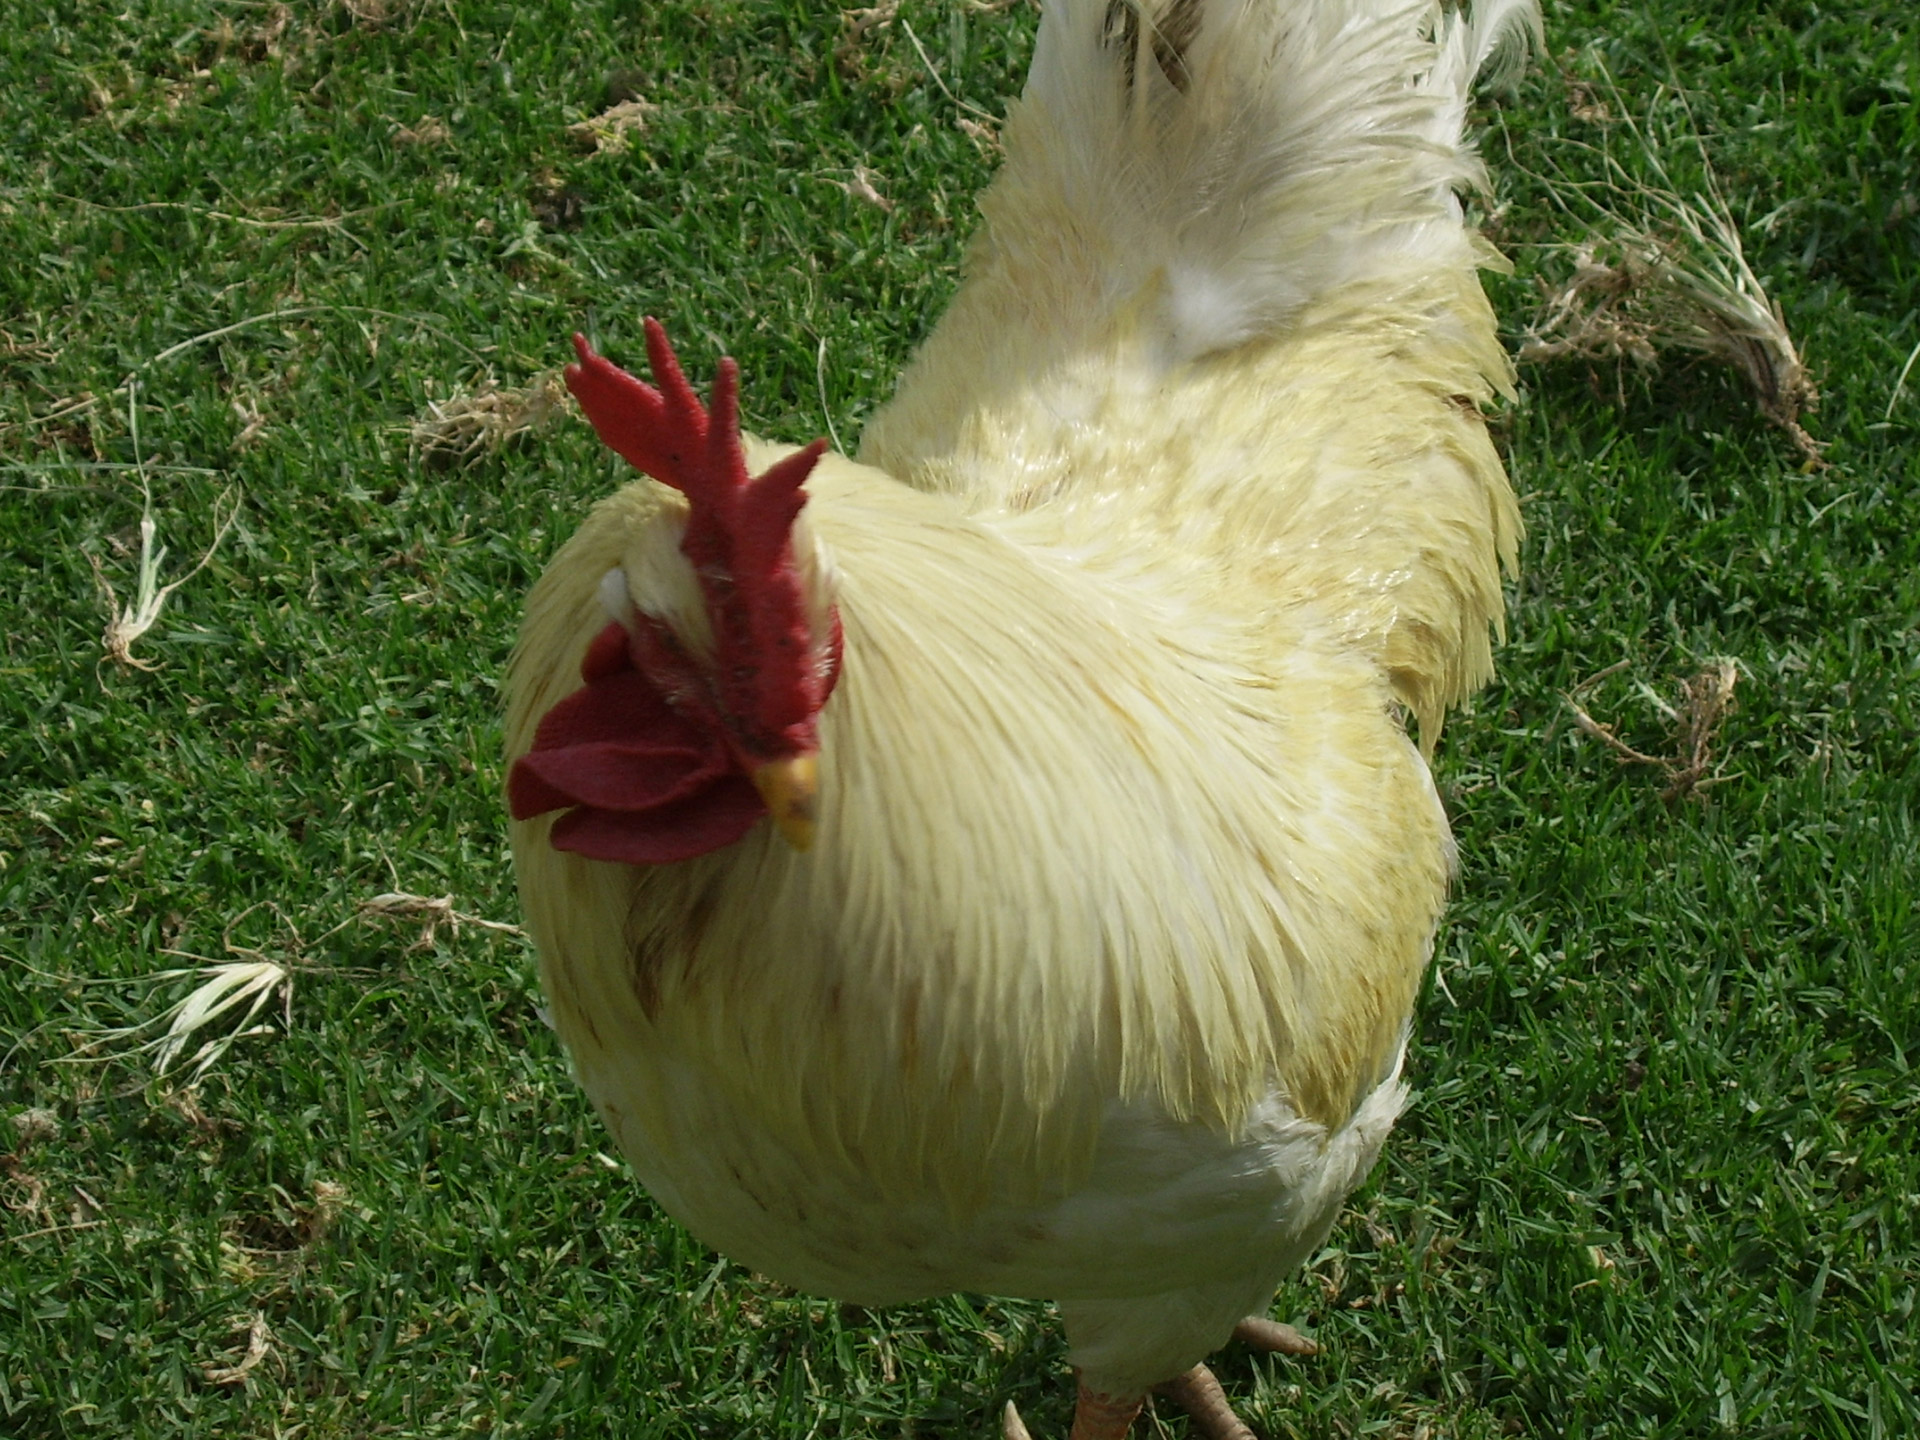 White rooster photos found on the web.